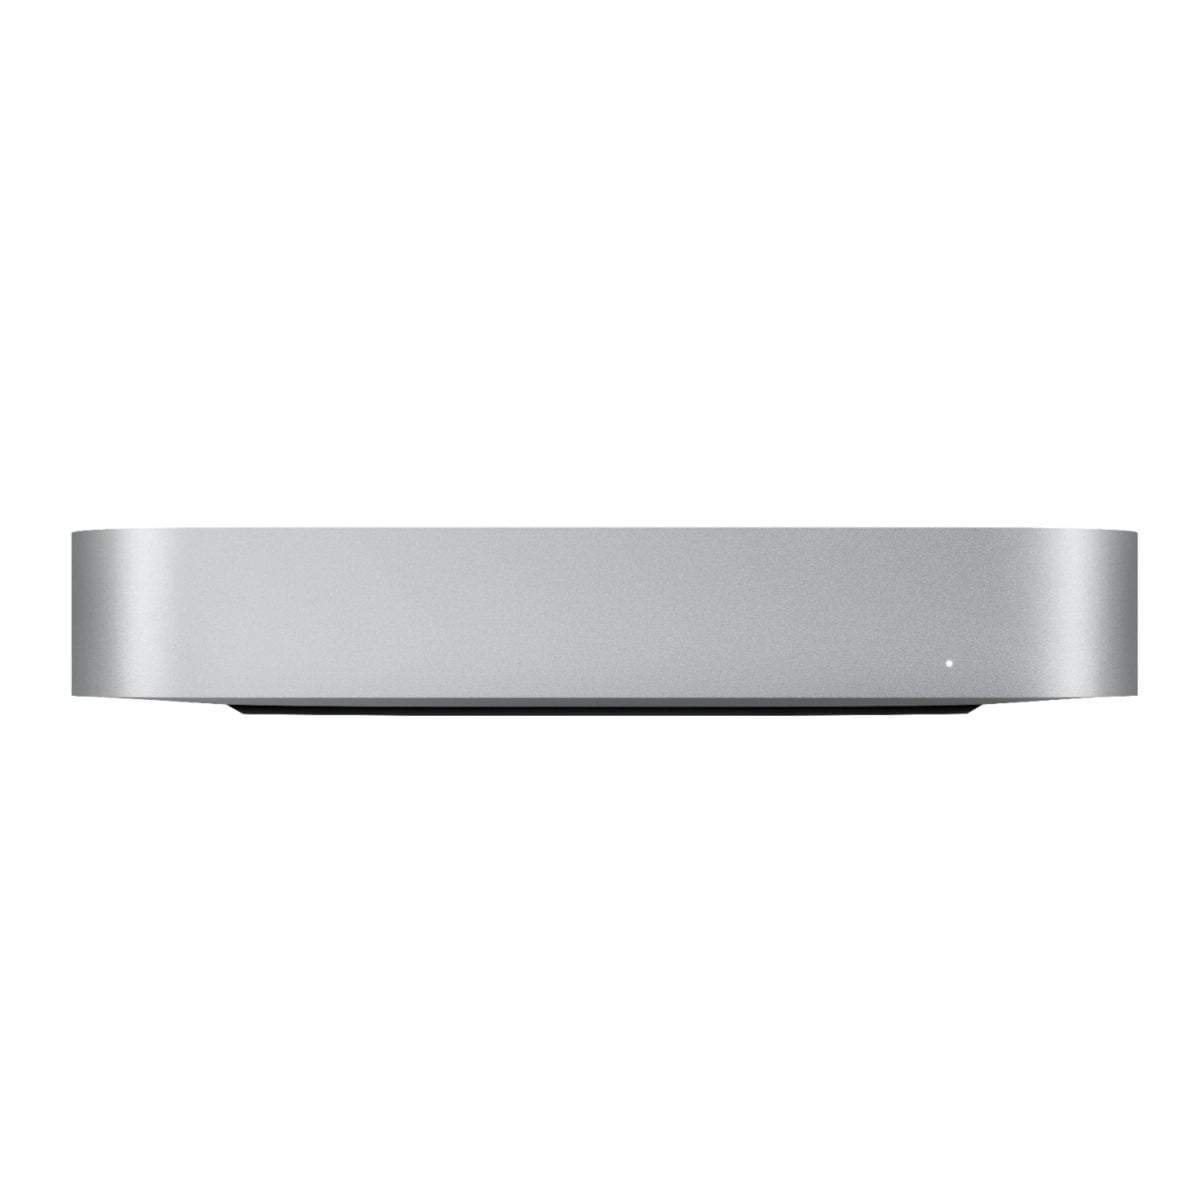 6427497Cv12D Scaled Apple &Lt;H1 Class=&Quot;Heading-5 V-Fw-Regular&Quot;&Gt;Mac Mini Desktop - Apple M1 Chip - 8Gb Memory - 256Gb Ssd (Latest Model) - Silver&Lt;/H1&Gt; Https://Www.youtube.com/Watch?V=3Oq__Scnyna Mac Mini, The Most Versatile, Do-It-All Mac Desktop, To A Whole New Level Of Performance. With Up To 3X Faster Cpu Performance, Up To 6X Faster Graphics, A Powerful Neural Engine With Up To 15X Faster Machine Learning, And Superfast Unified Memory — All In An Ultracompact Design.so You Can Create, Work, And Play On Mac Mini With Speed And Power Beyond Anything You Ever Imagined. Mac Mini Mac Mini Desktop - Apple M1 Chip - 8Gb Memory - 256Gb Ssd (Latest Model) - Silver